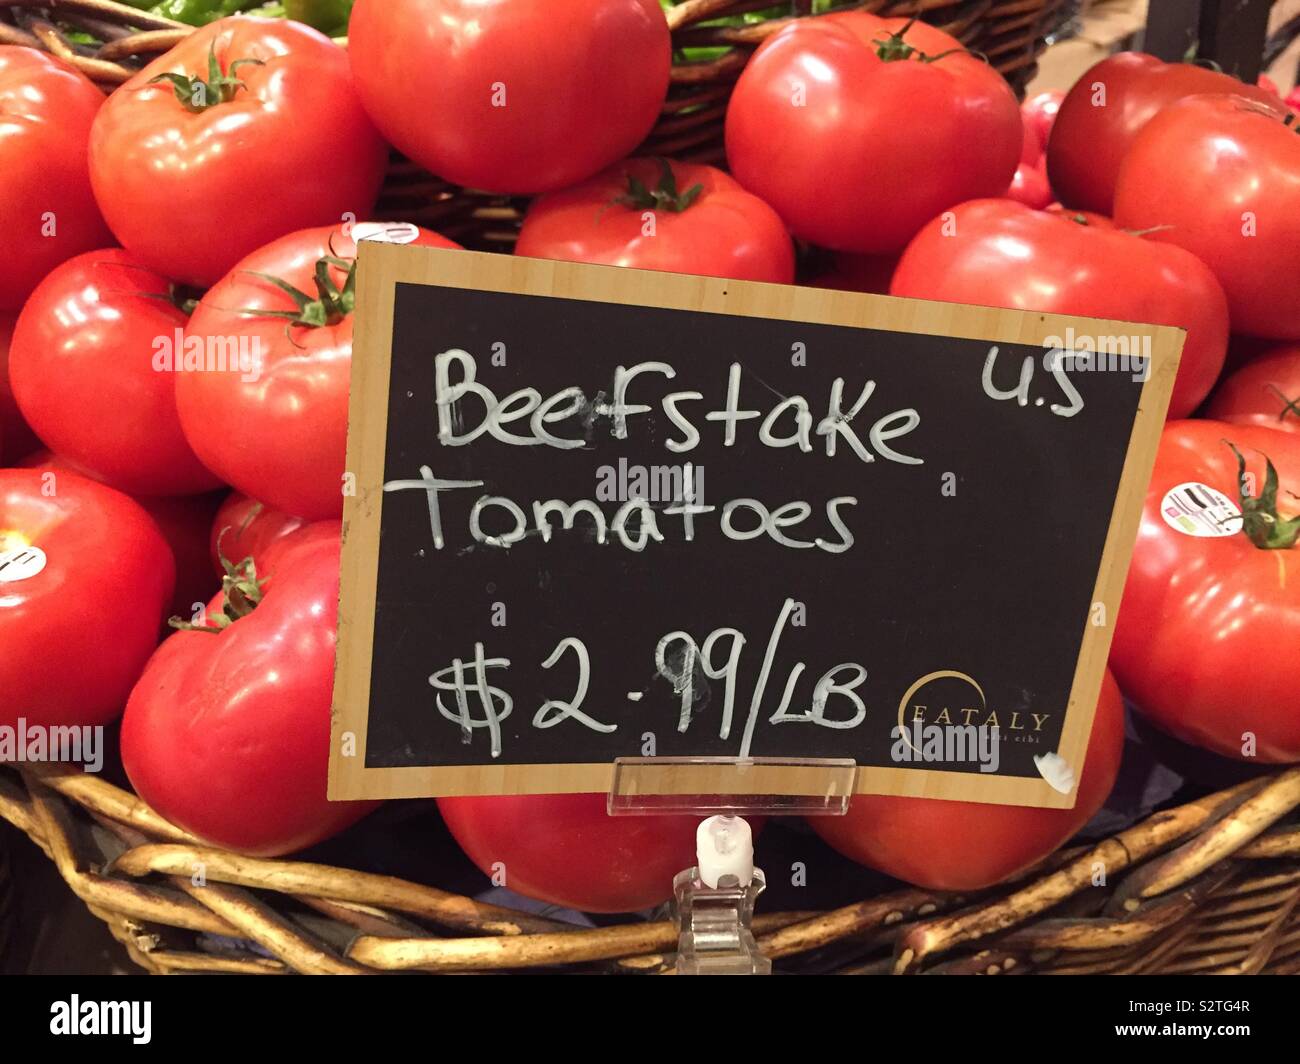 Beefstake tomatoes for sale in the produce aisle of the grocery store, USA Stock Photo